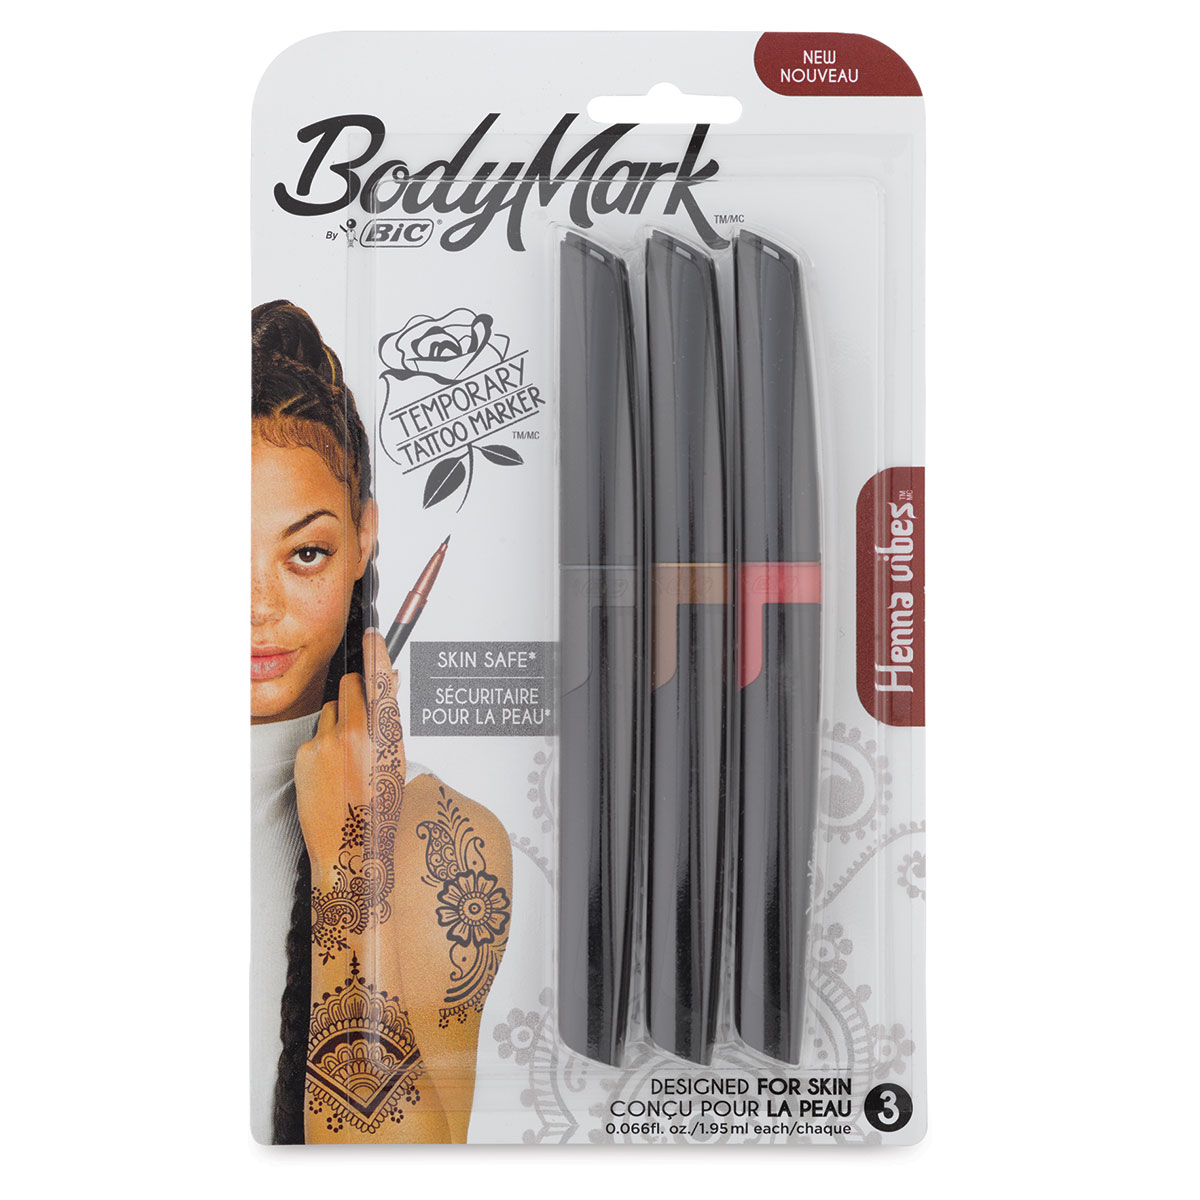 Bic BodyMark Temporary Tattoo Markers and Sets